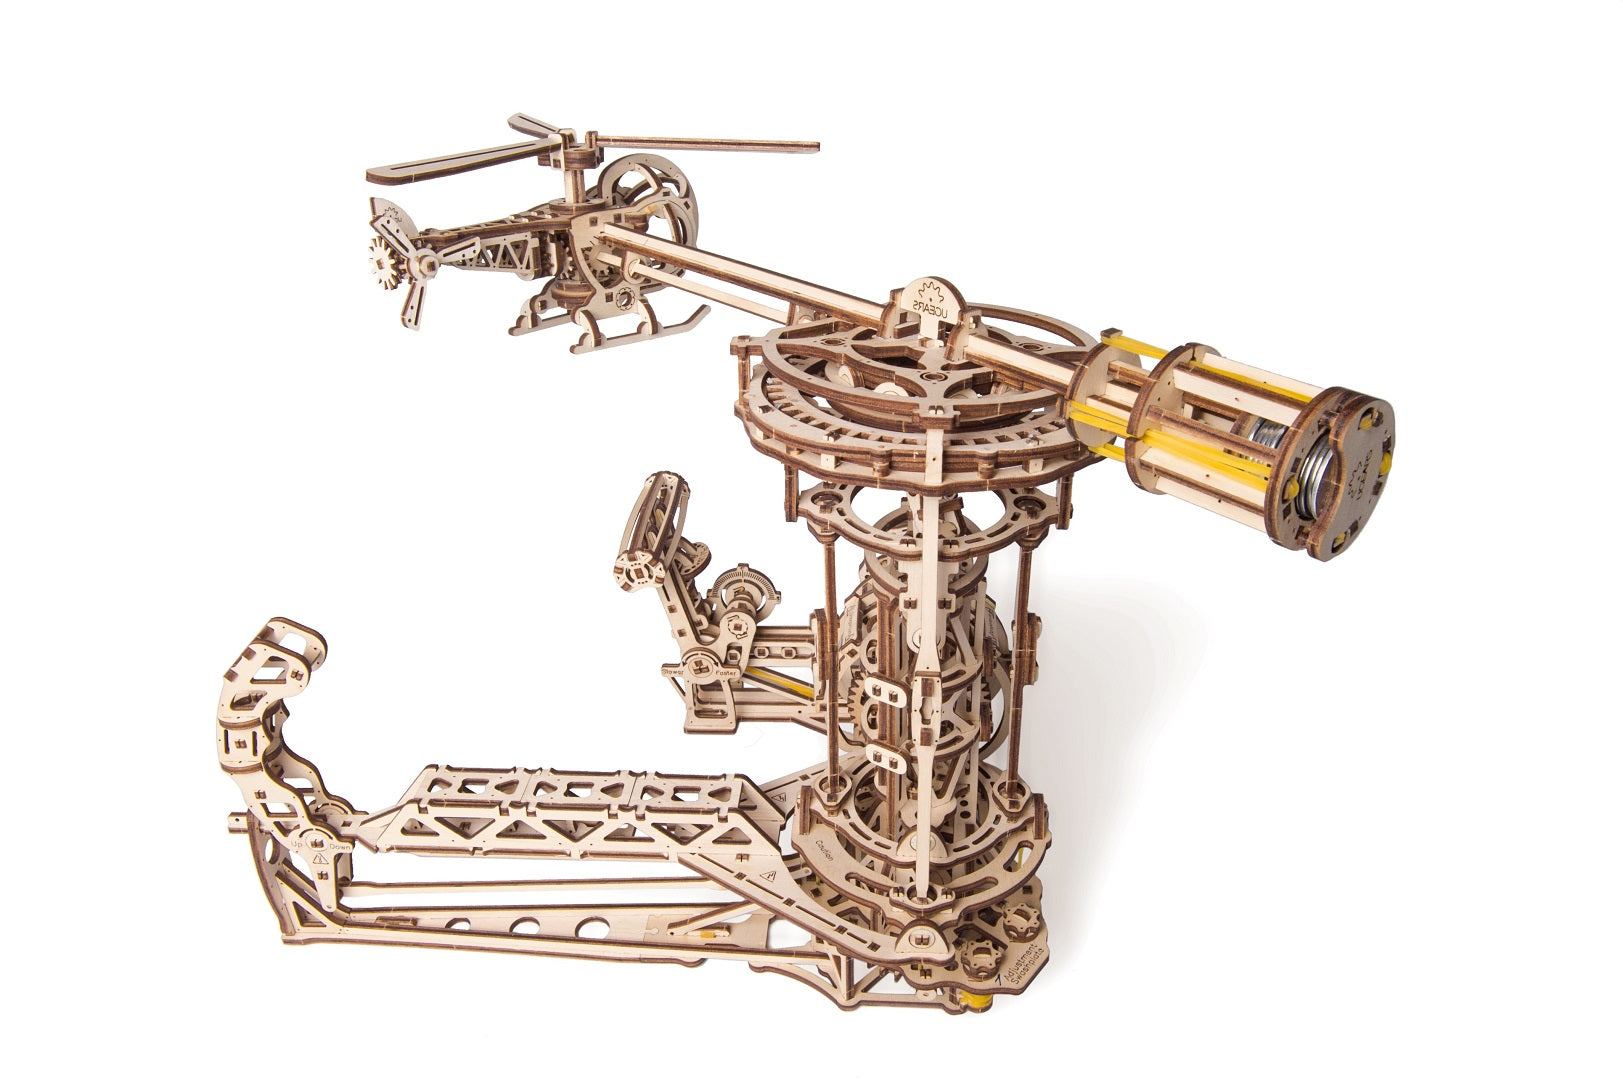 Newest 2020 Ugears Models That You Don't Want to Miss - Puzzle Score